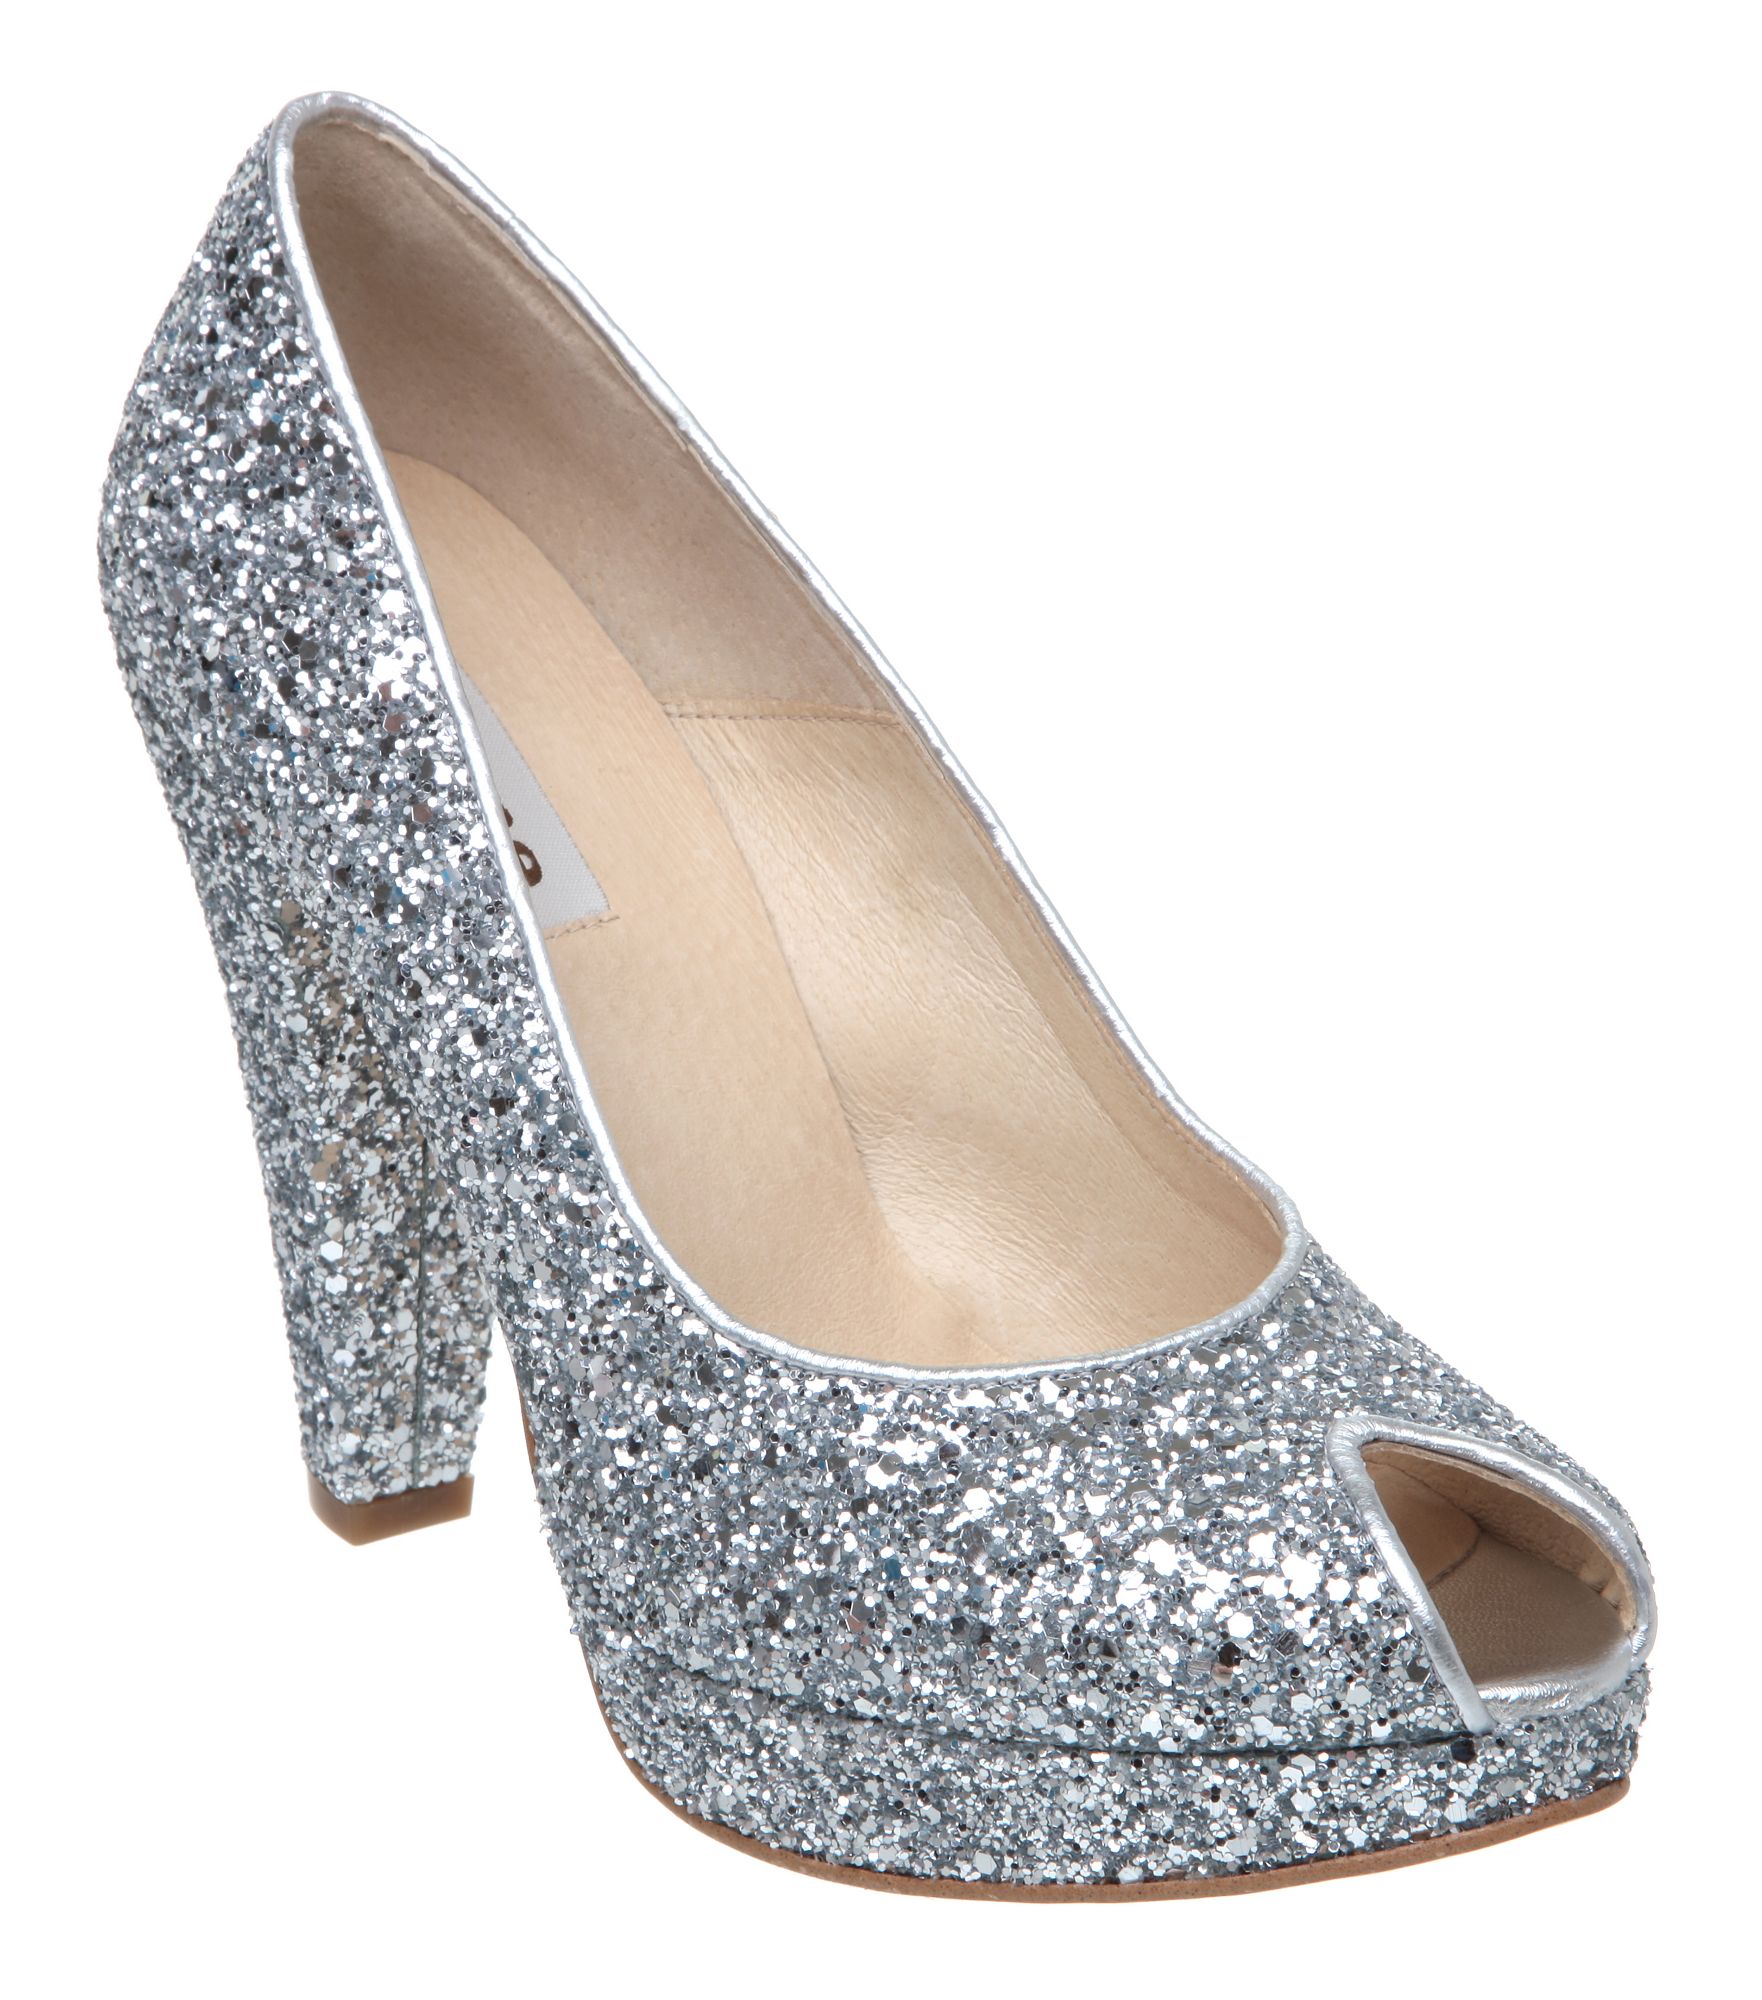 Dune Whirl D Glitter Peep Toe Platform Court Shoes in Silver | Lyst